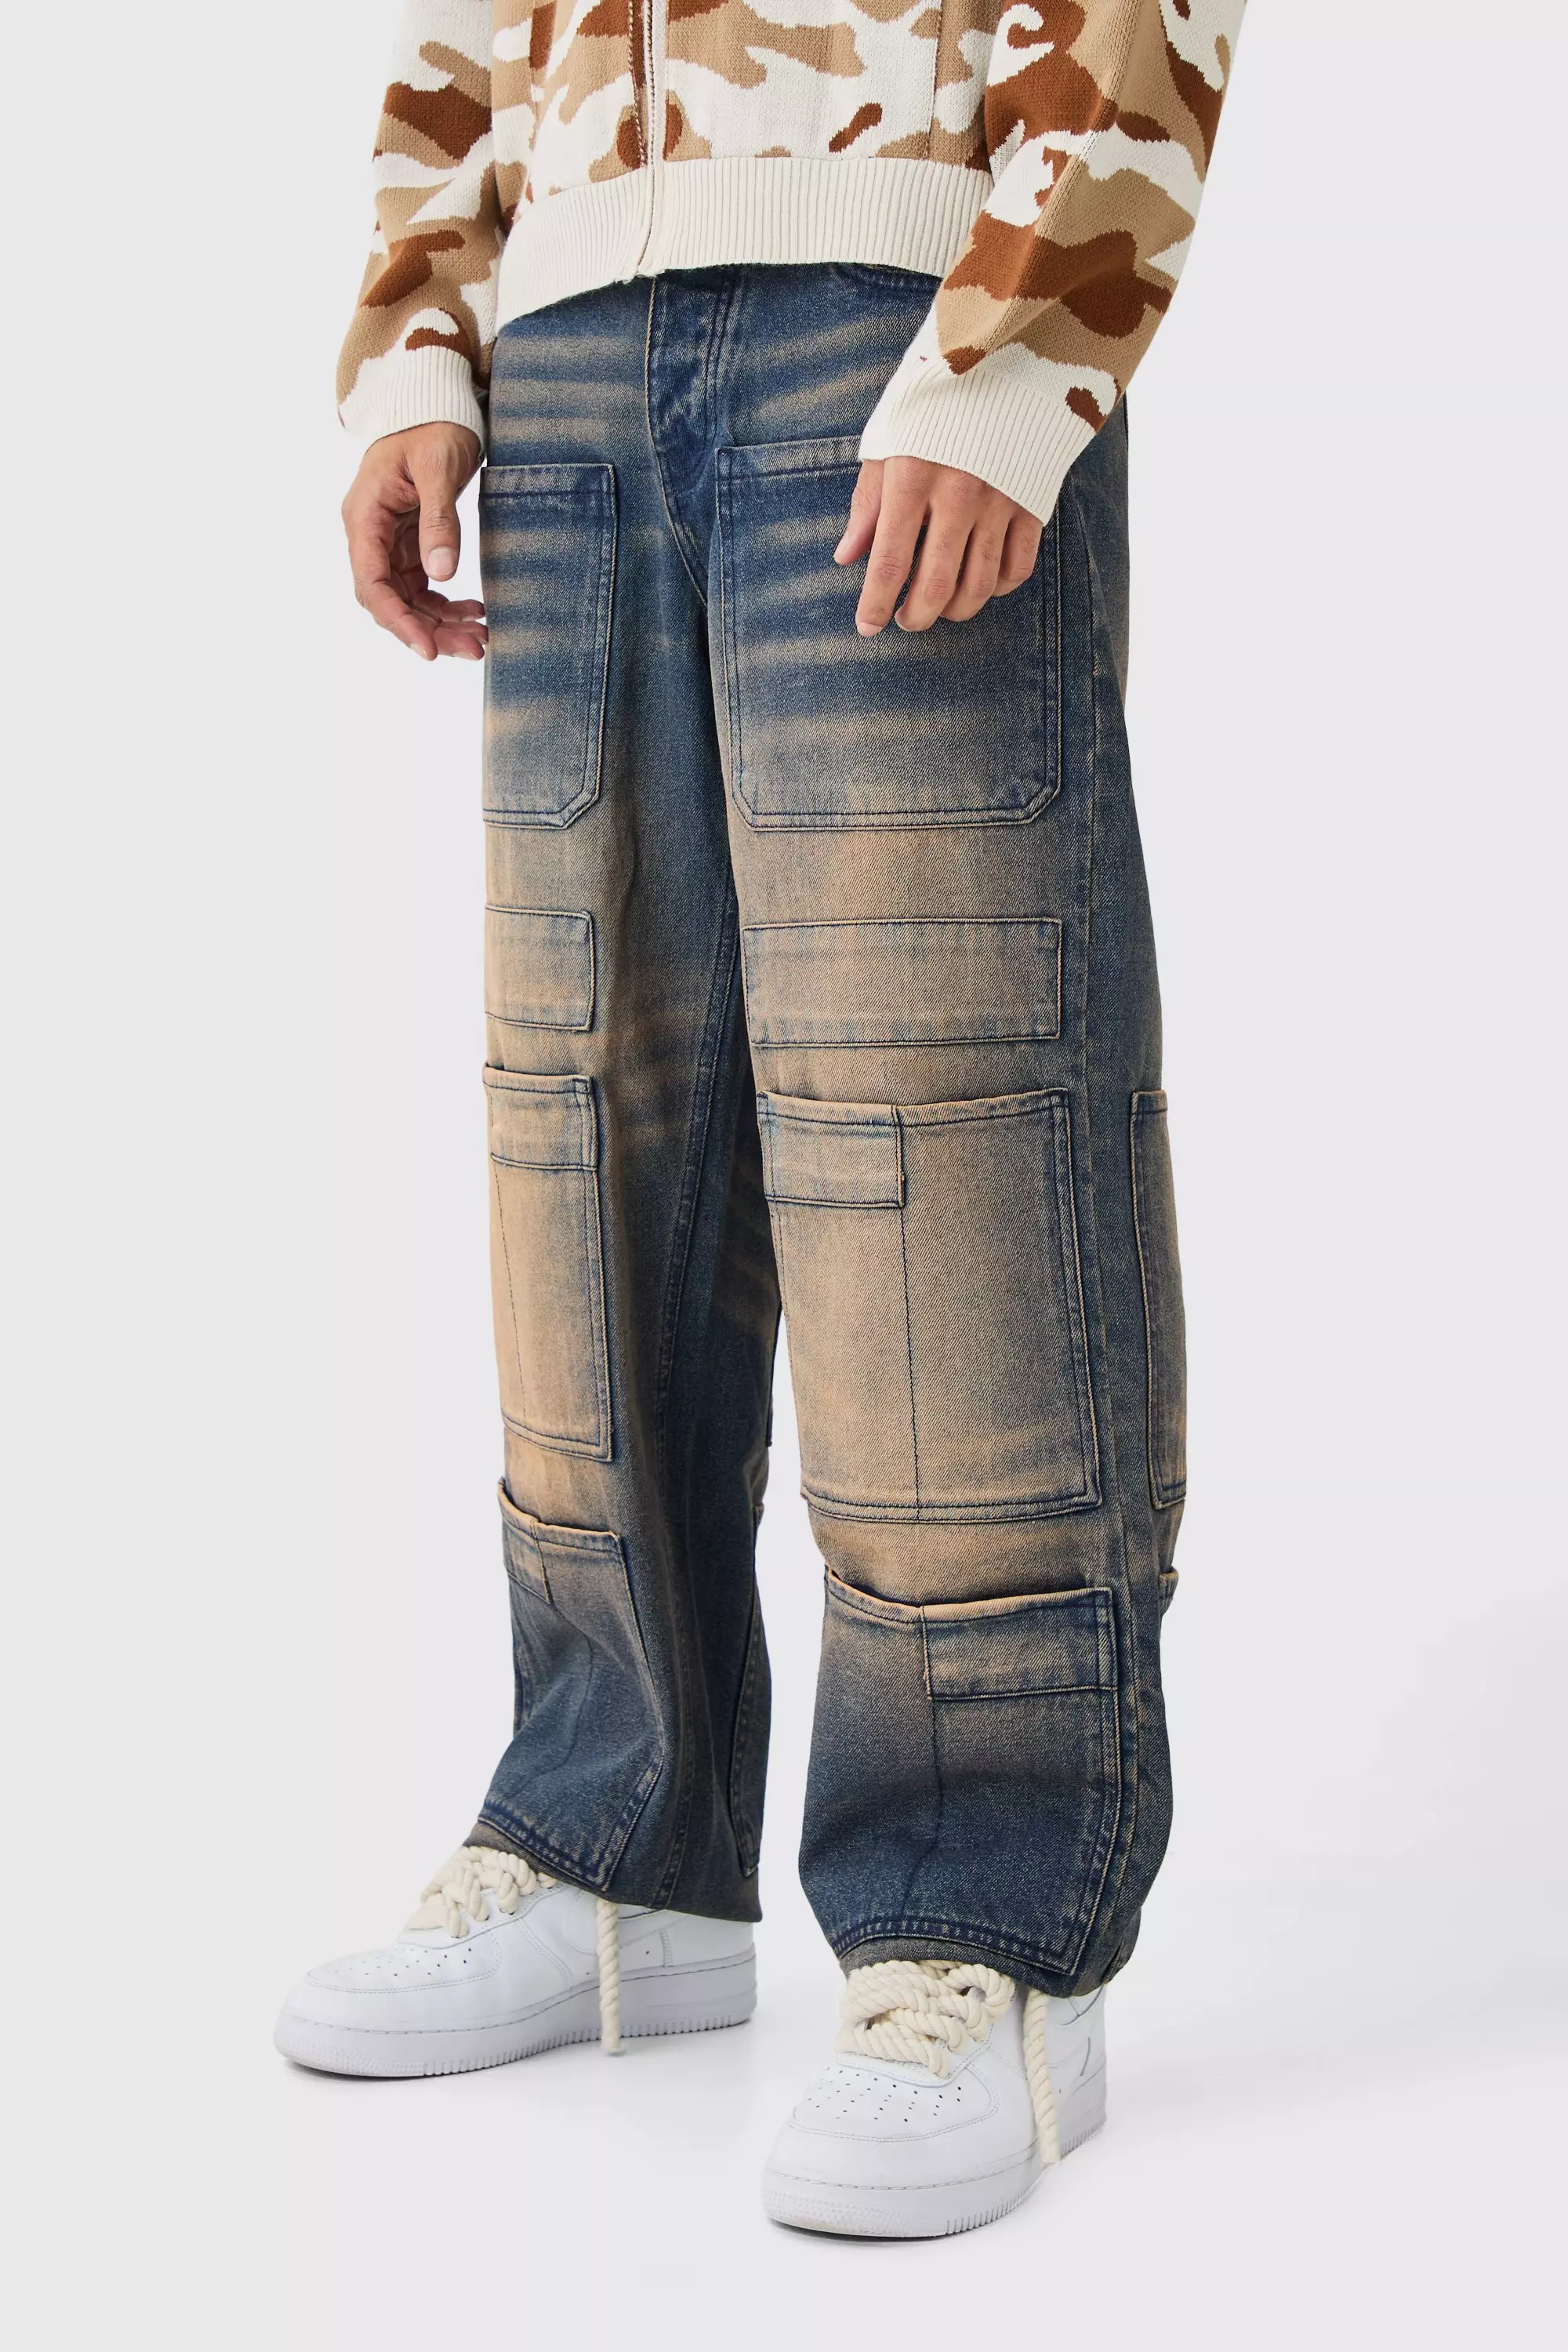 Back Multi-pockets Washed Stars Baggy Jeans for Men and Women Straight Ropa  Hombre Y2k Denim Pants Oversize Casual Trousers